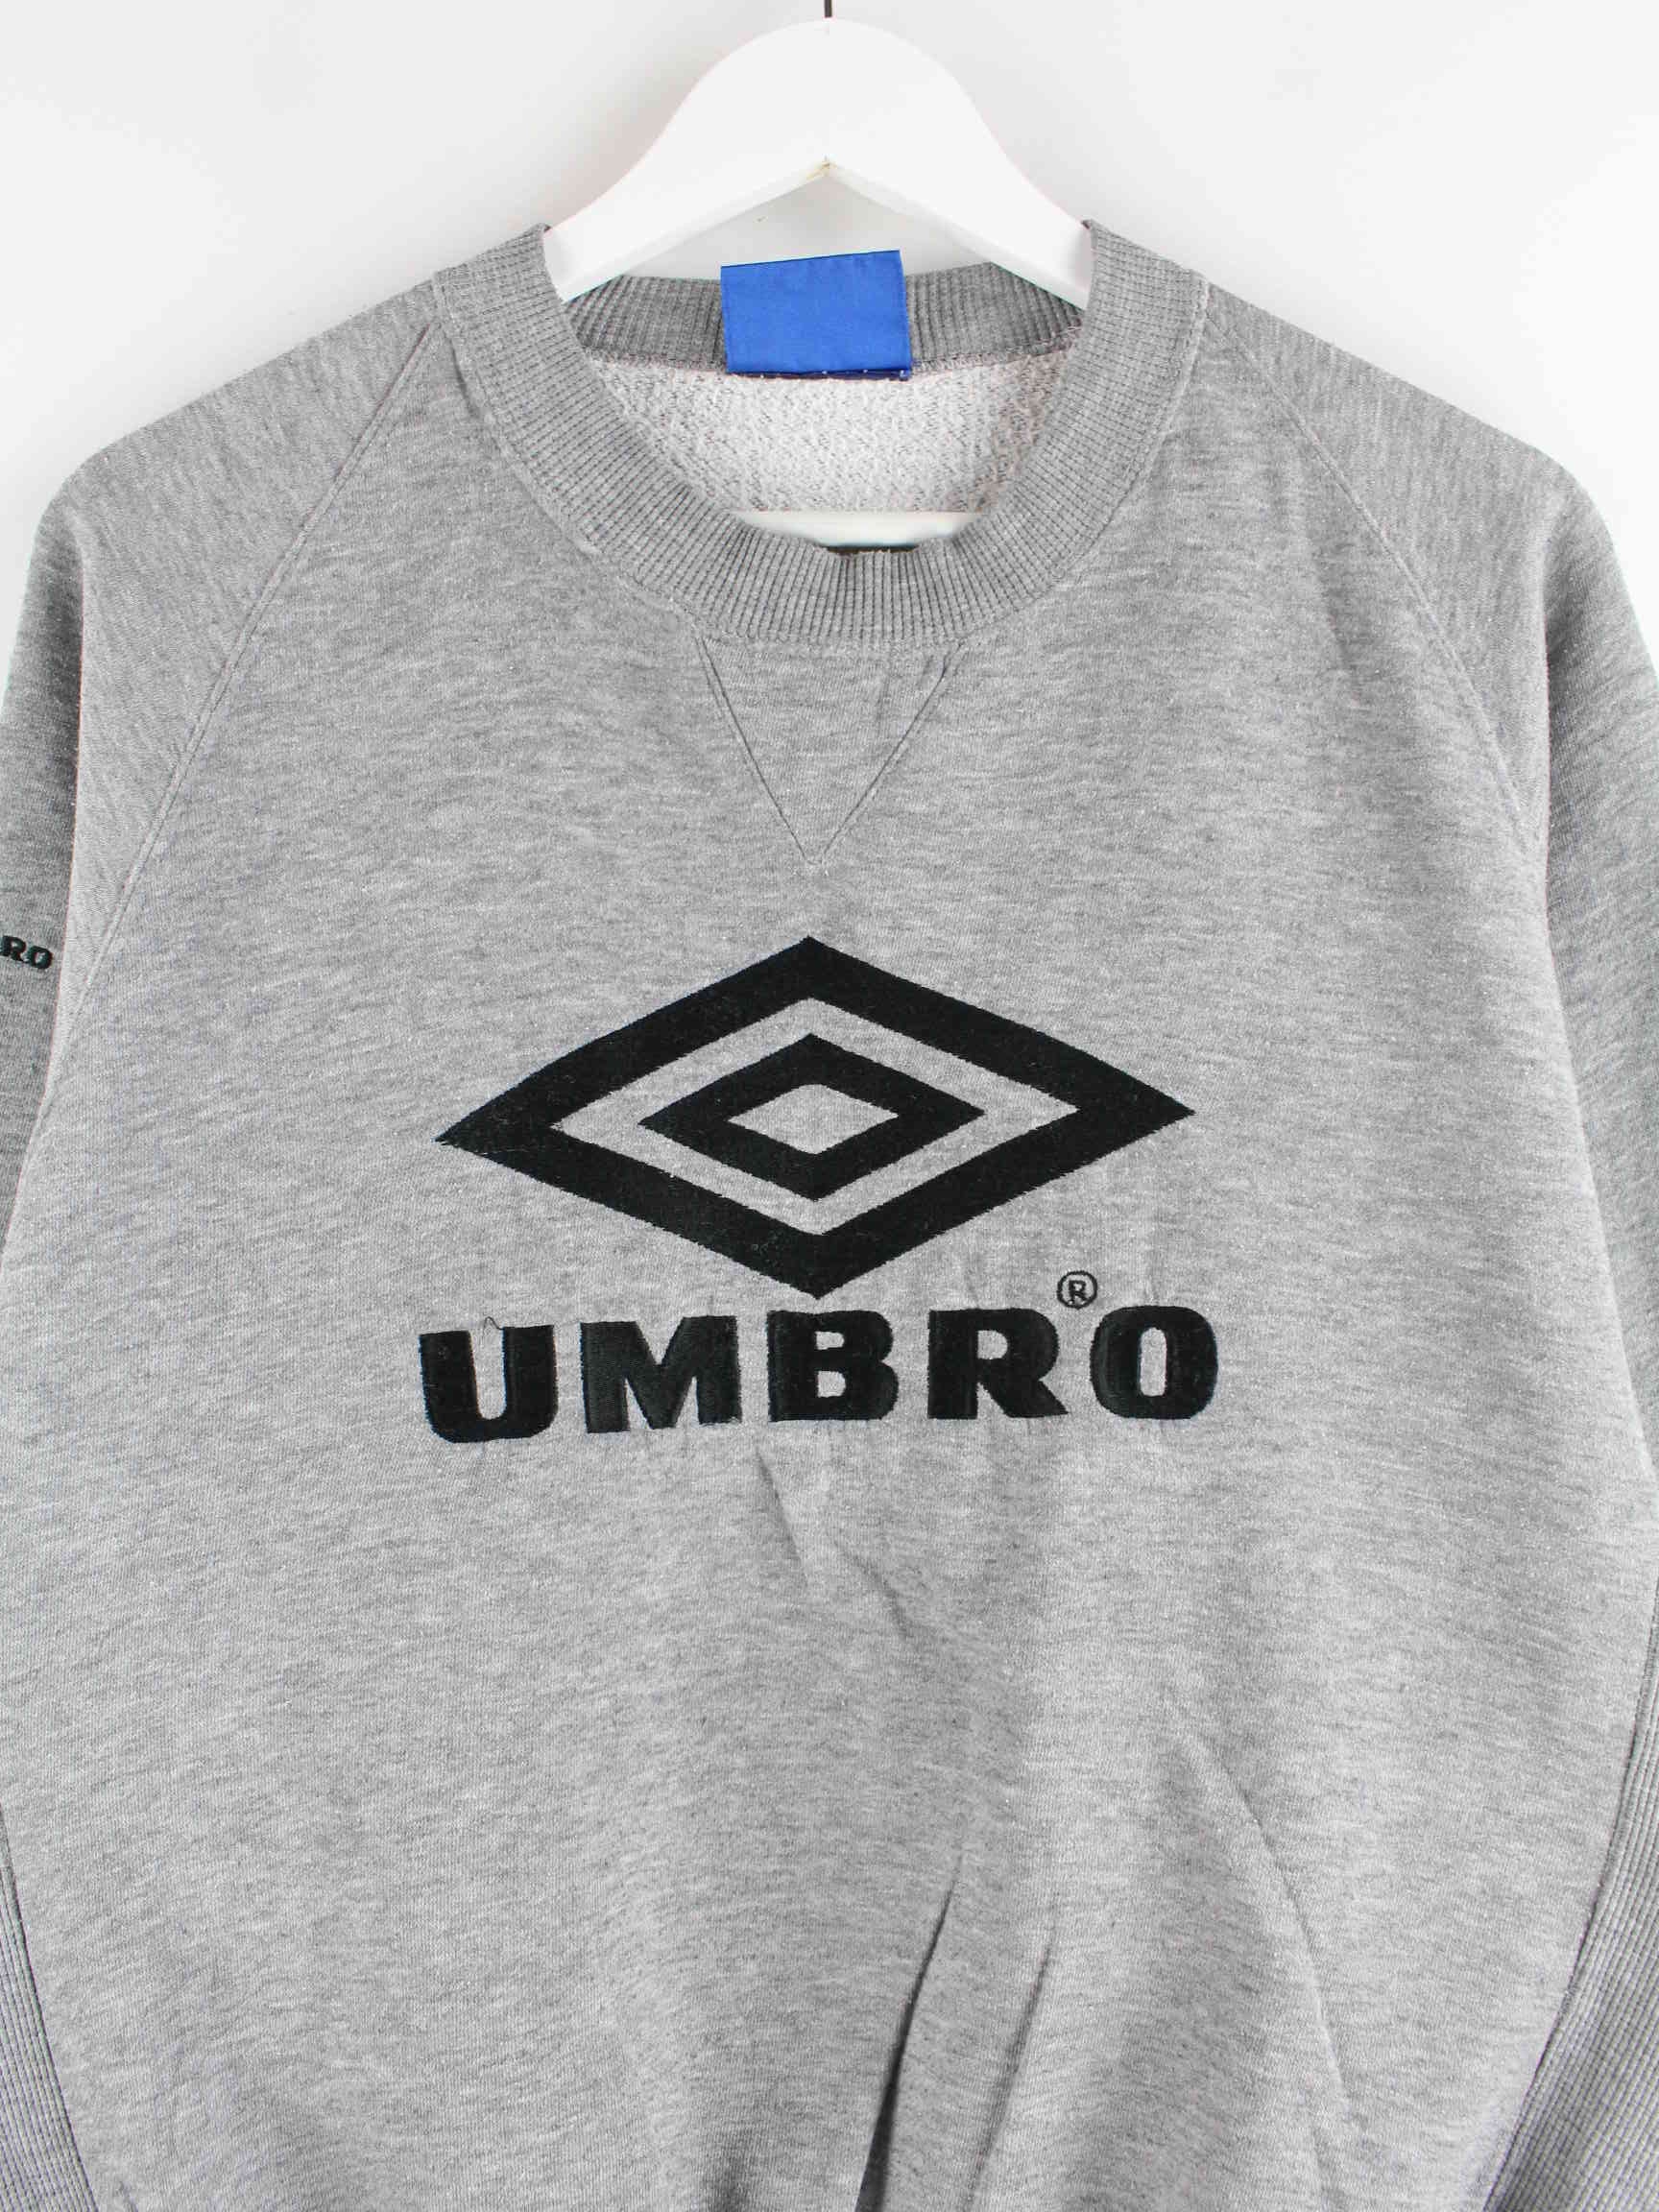 Umbro 90s Vintage Embroidered Sweater Gray L